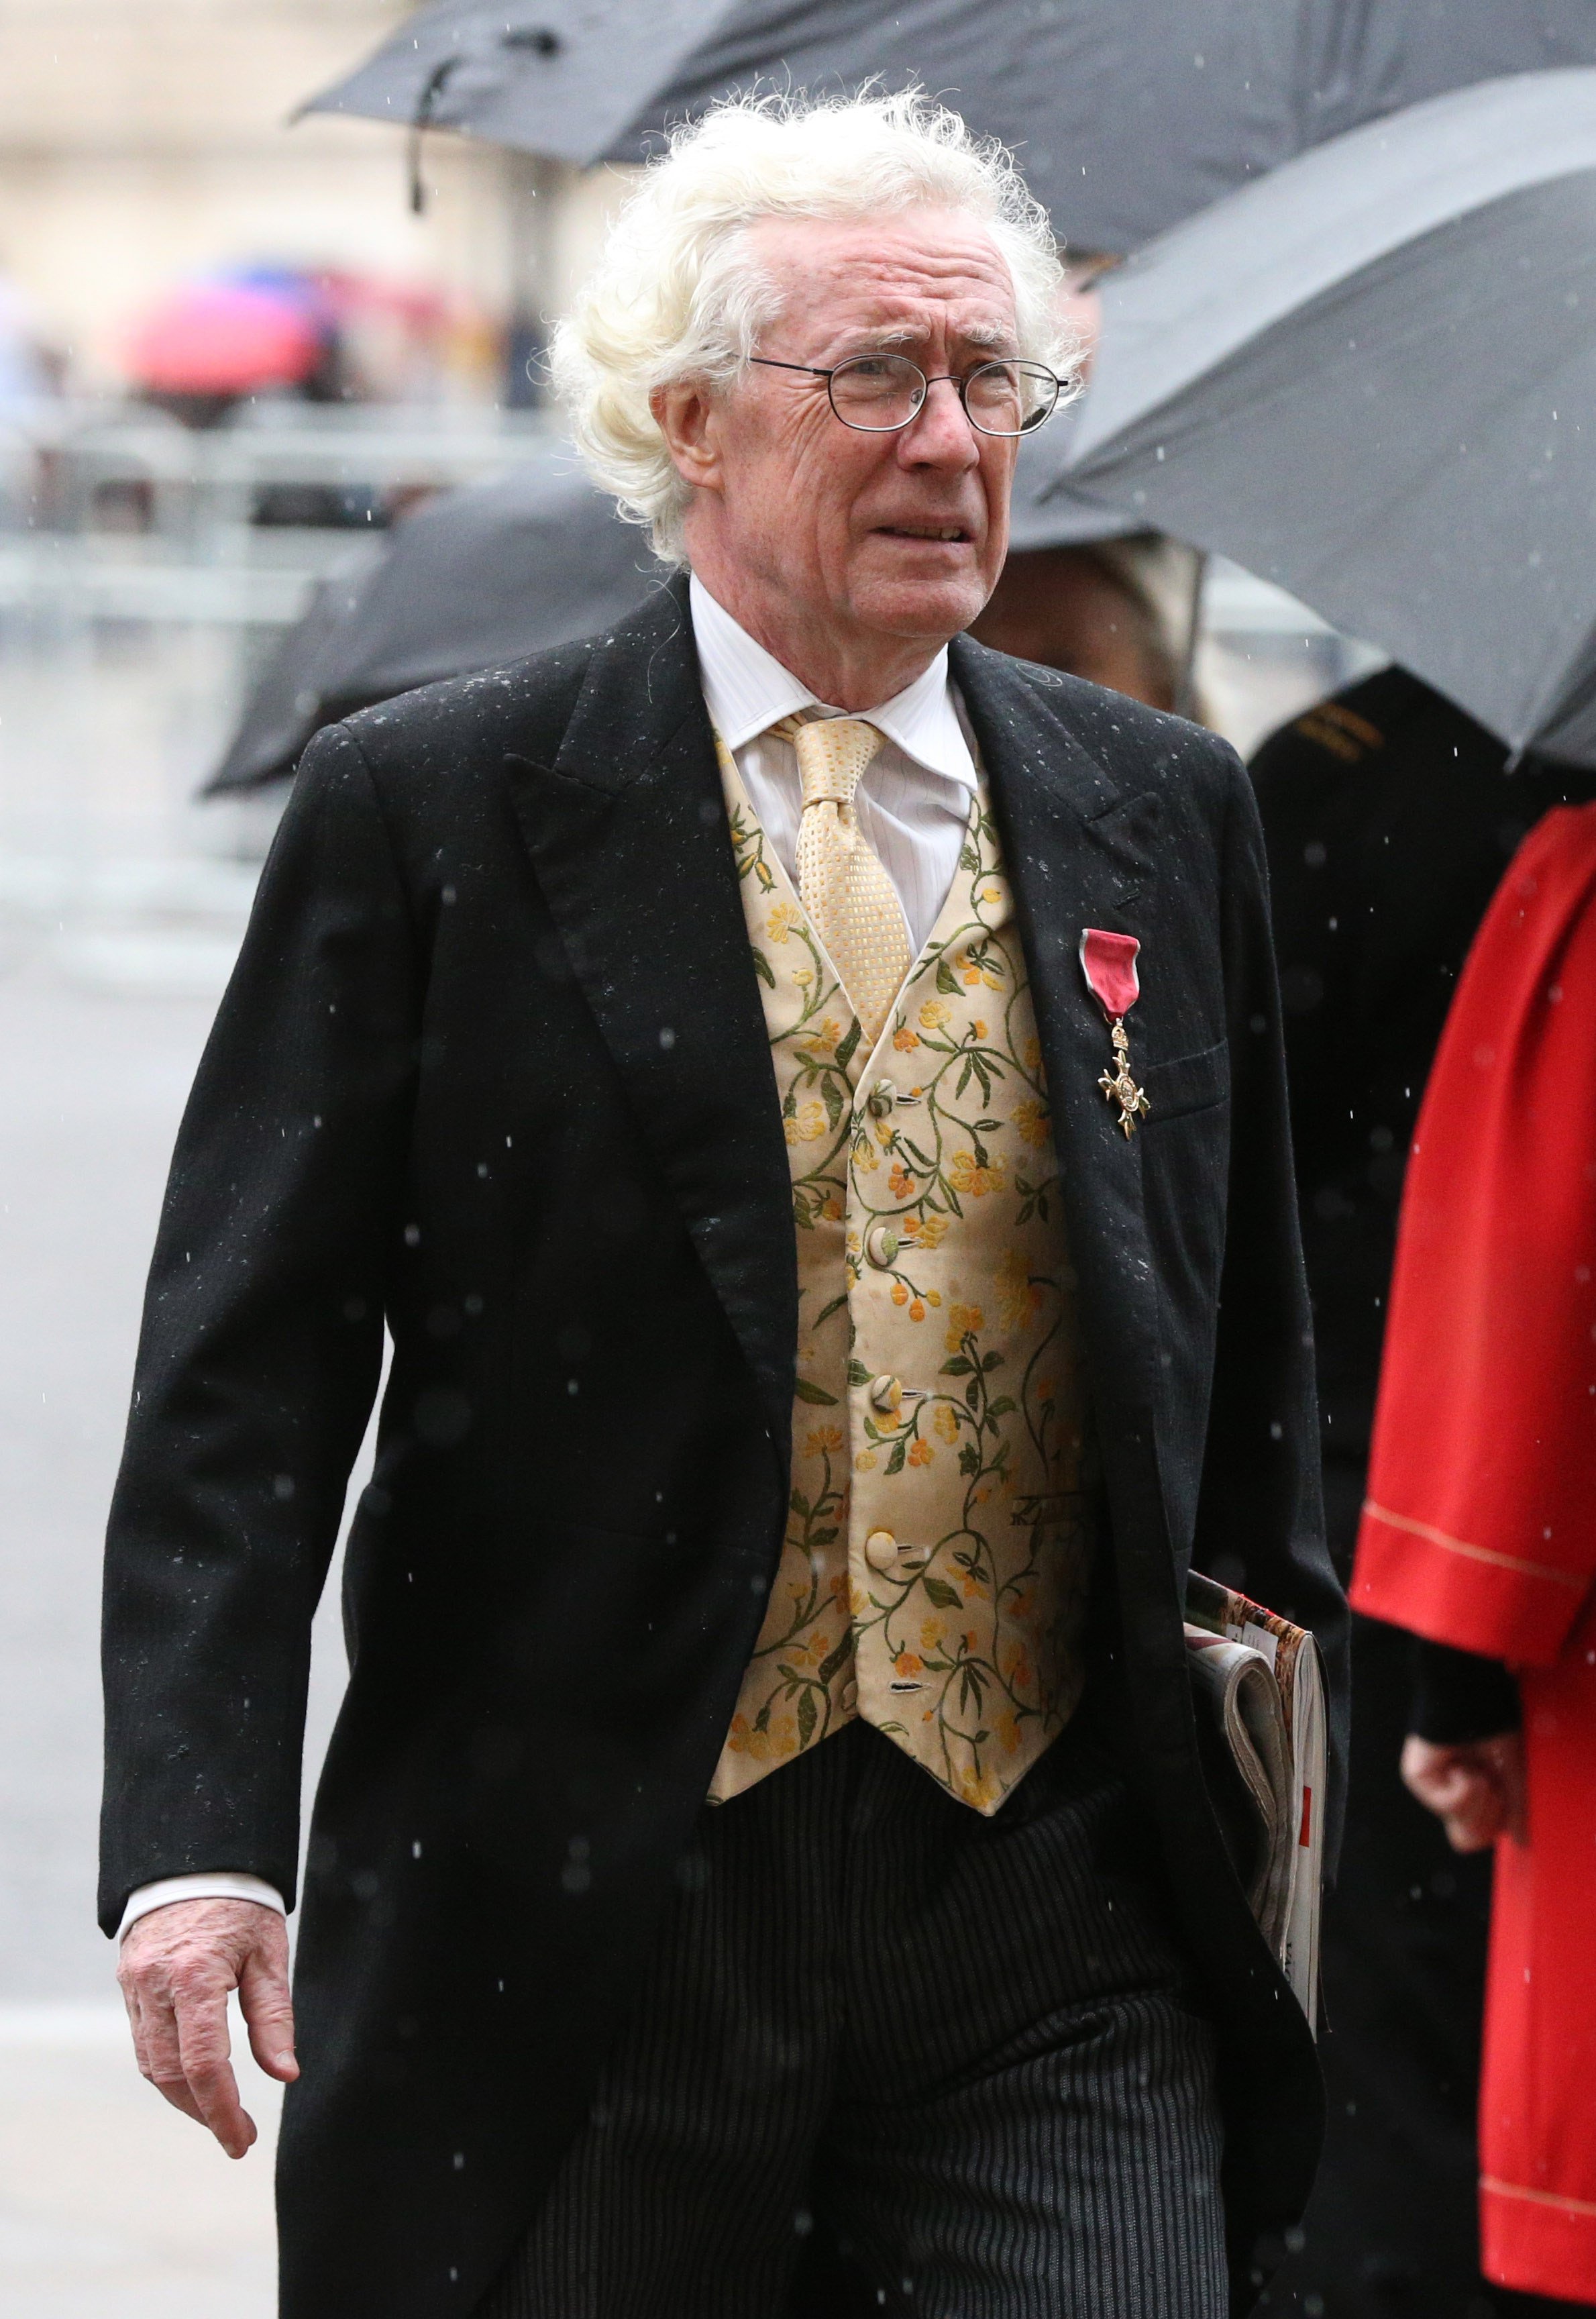 Jonathan Sumption has said the rule of law in Hong Kong had been “profoundly compromised” and judges had to “operate in an impossible political environment created by China”. Photo: Getty Images 